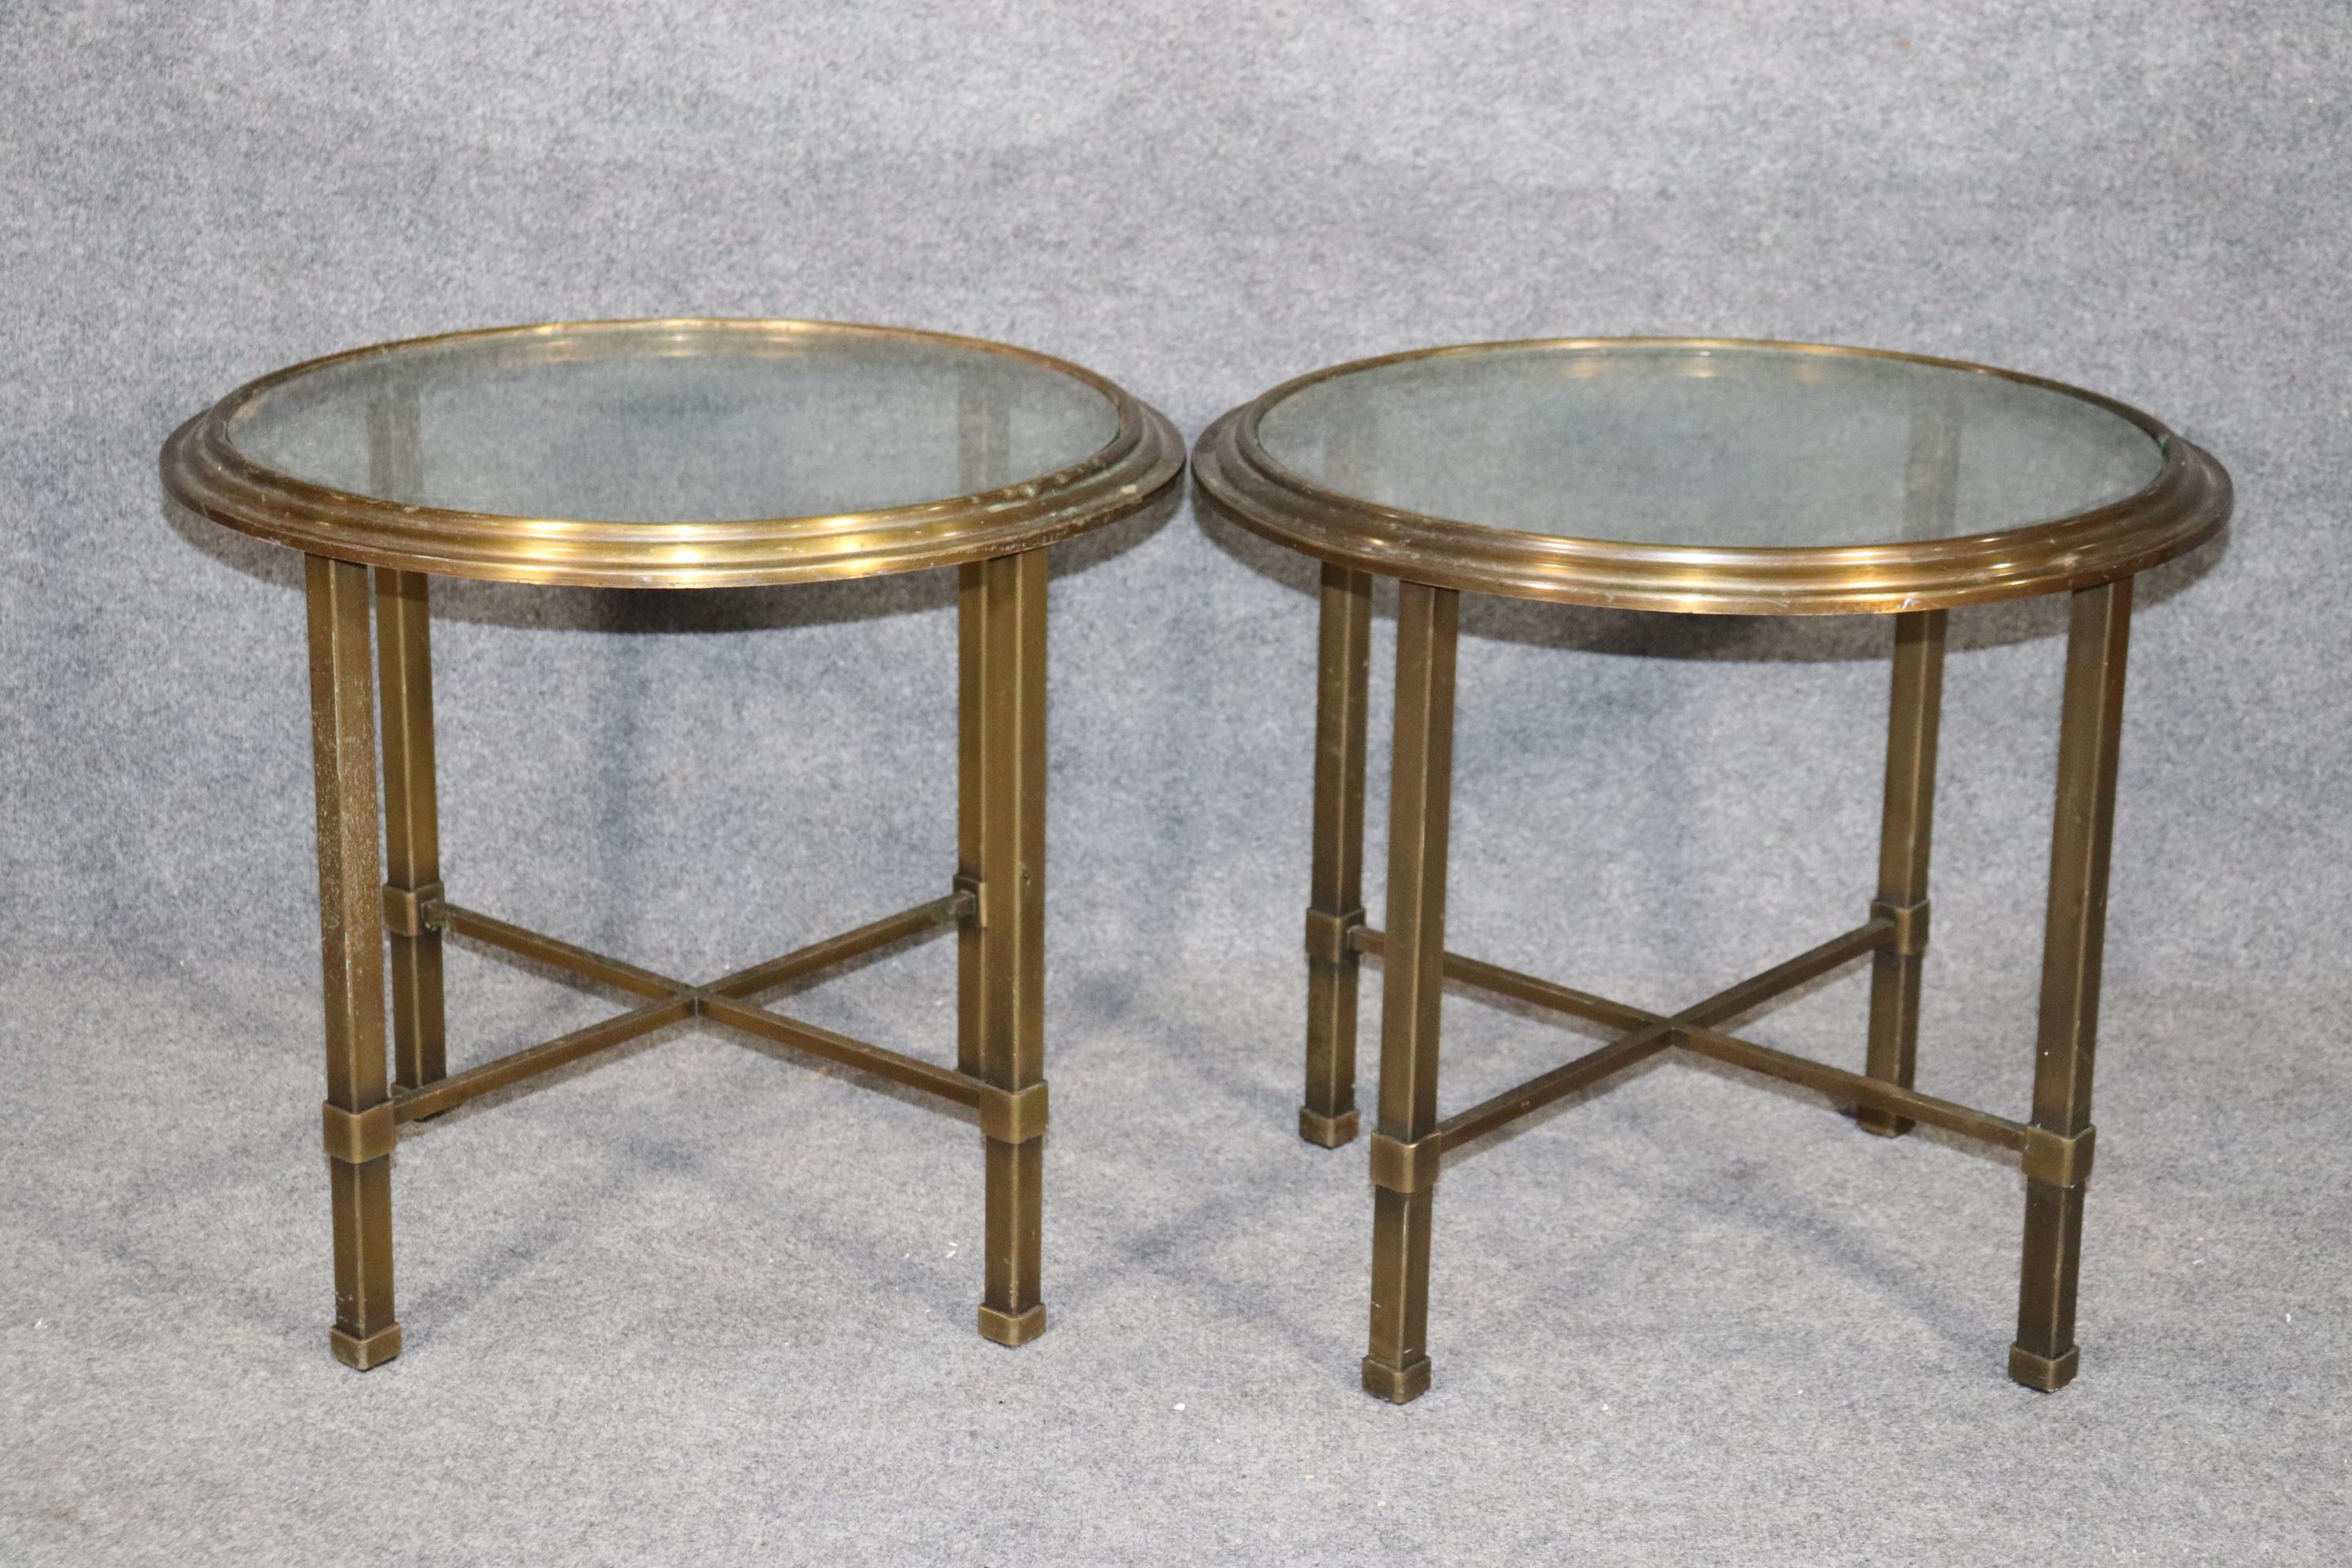 This is a rare pair of Mastercraft (attributed) brass and glass end tables. The tables are vintage and have a beautiful almost Art Deco design but are more accurately described as mid-century modern. The tables have their original patina and can be